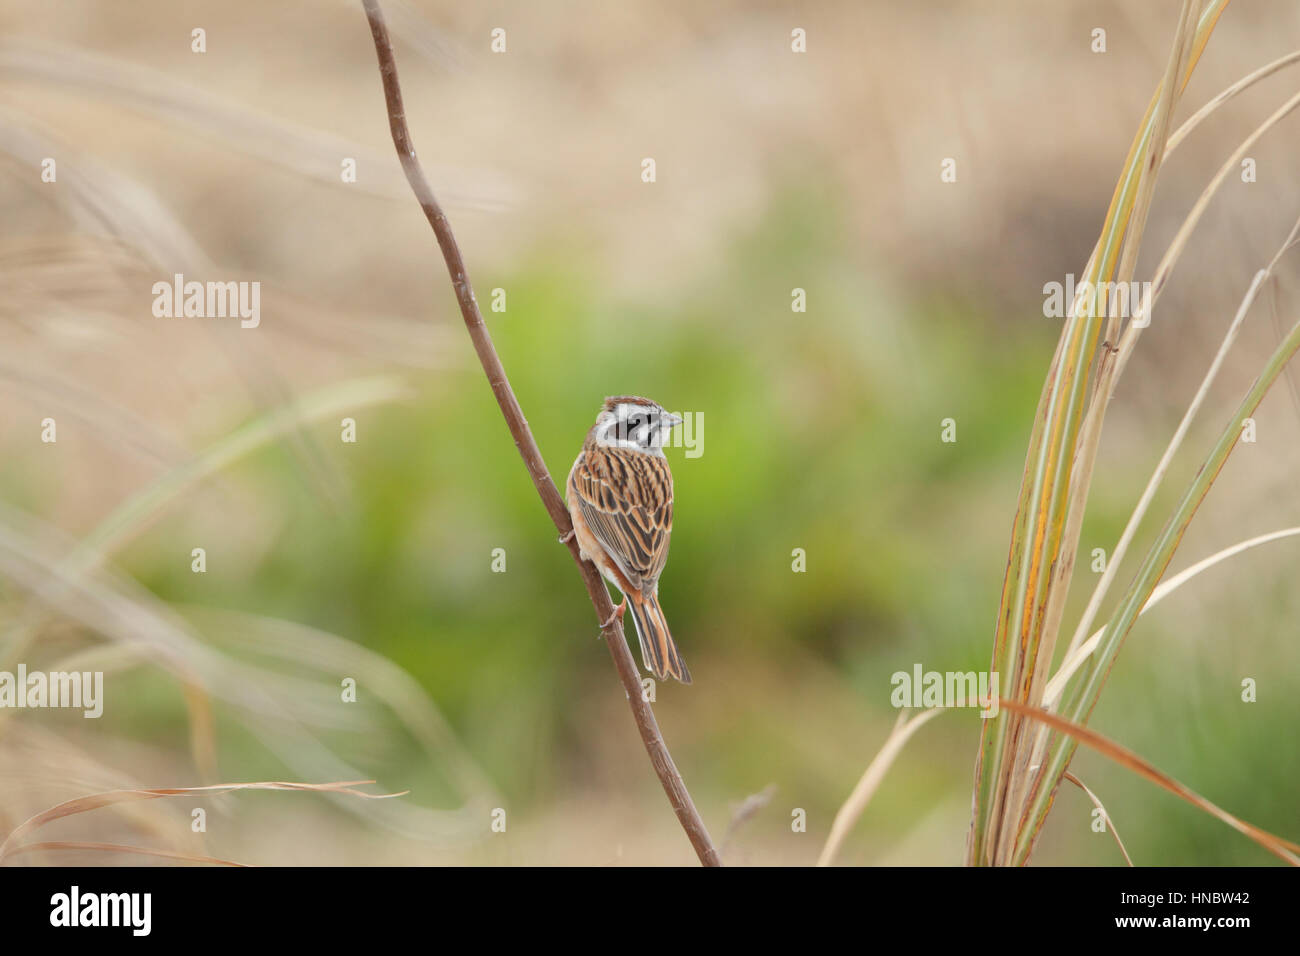 Meadow Bunting (Emberiza cioides), an Asian, seed-eating bird with a stripy head, perched on a slender stem Stock Photo